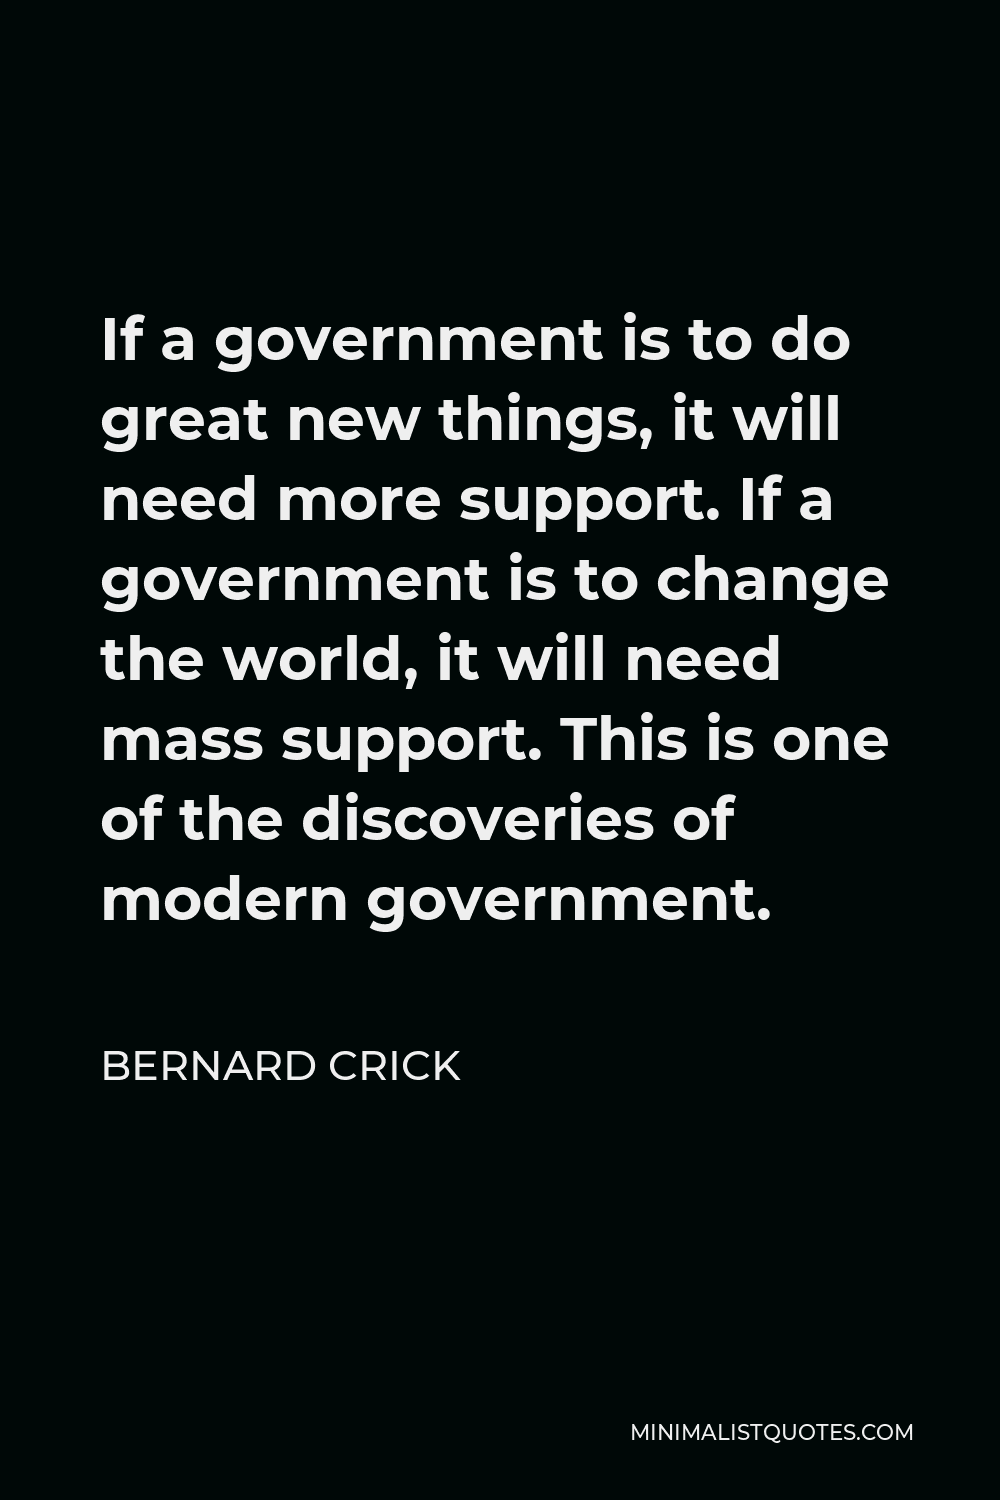 Bernard Crick Quote - If a government is to do great new things, it will need more support. If a government is to change the world, it will need mass support. This is one of the discoveries of modern government.